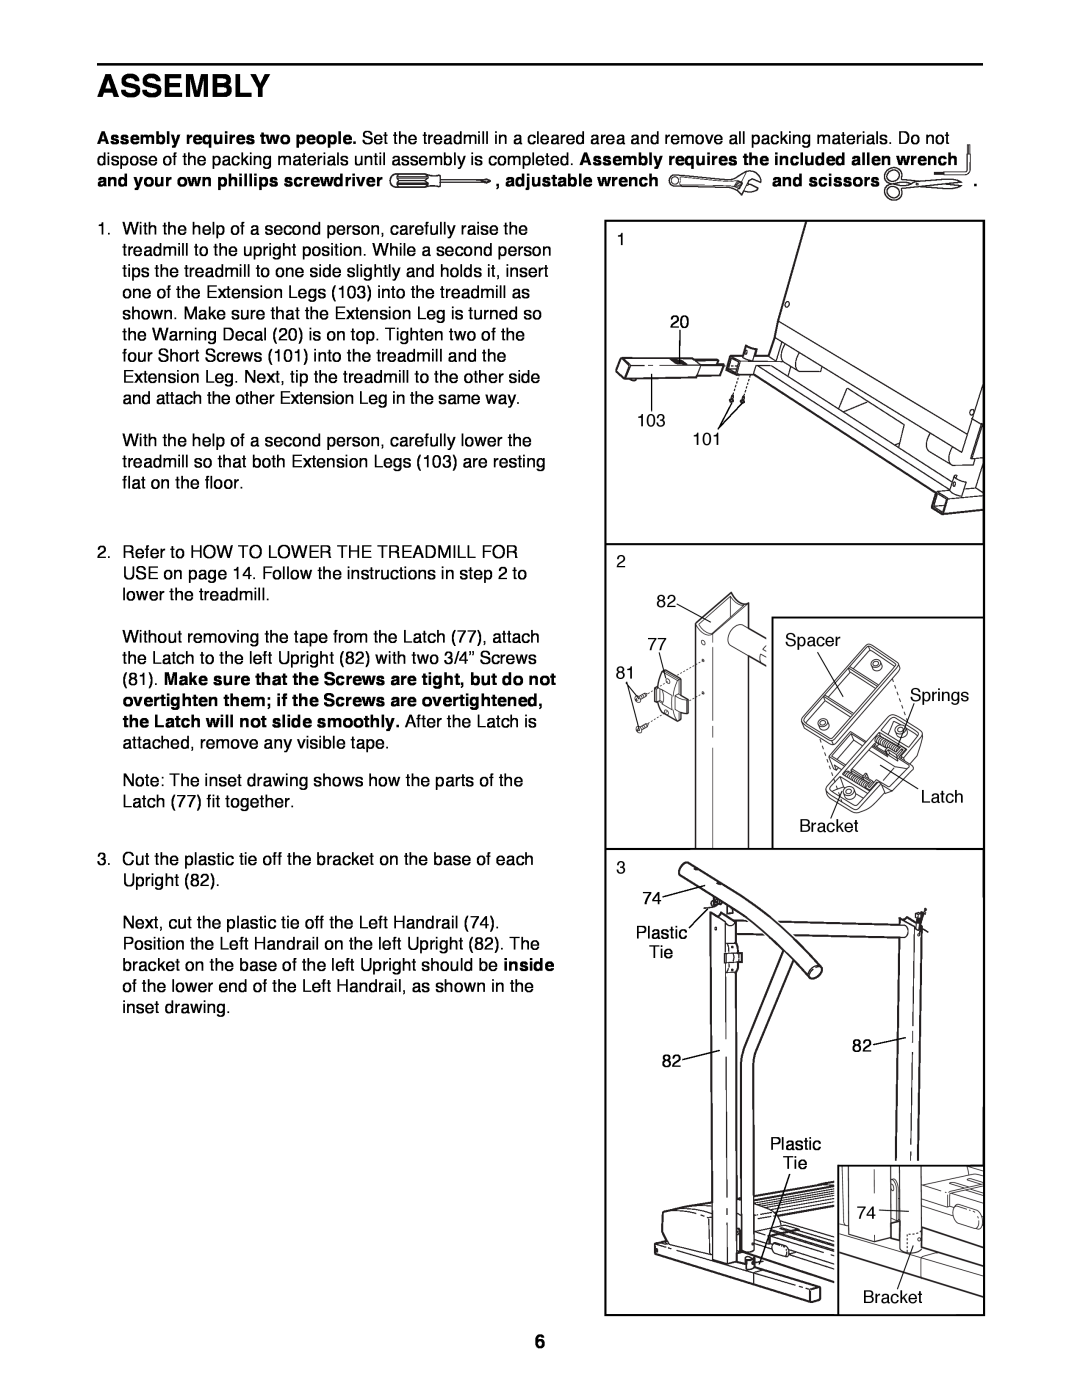 ProForm 831.297791 user manual Assembly, and your own phillips screwdriver , adjustable wrench and scissors 